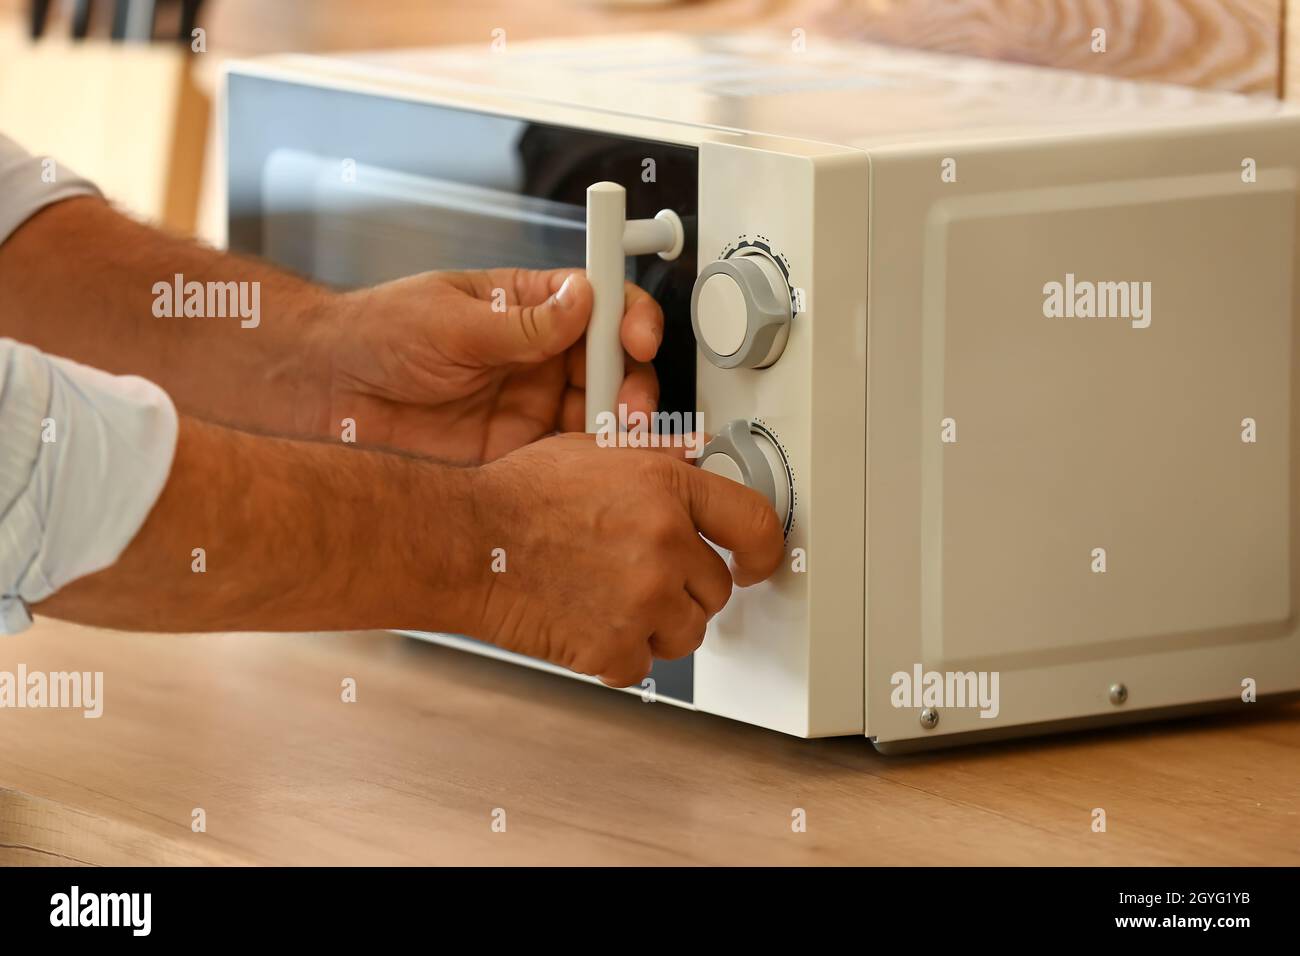 Close-up Of A Person Heating Food In Microwave Oven Stock Photo - Alamy